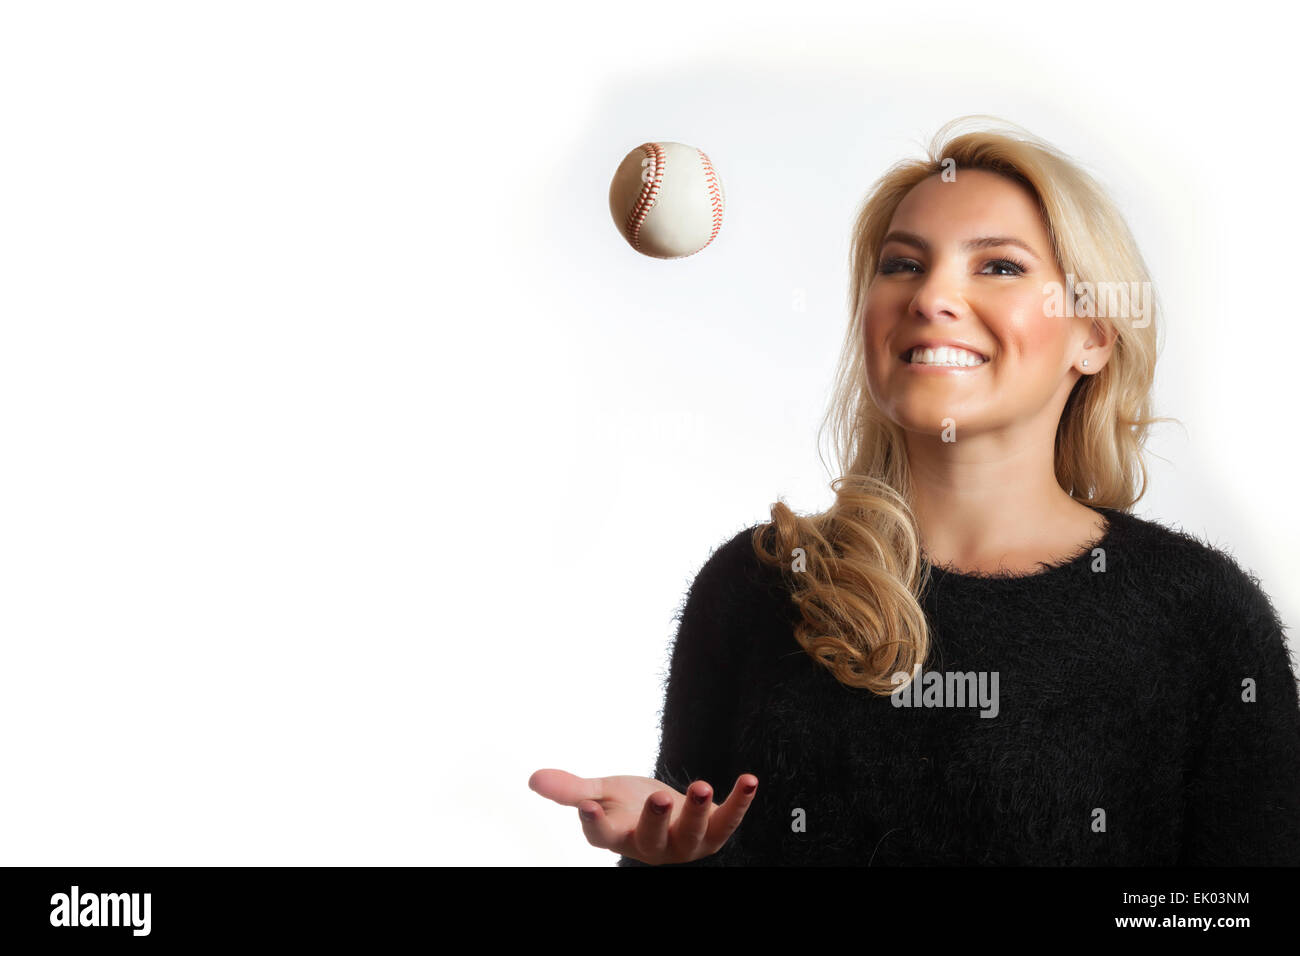 A pretty, Latina, blonde  in a black scarf tossing up and catching a baseball while smiling. Isolated on white background. Stock Photo